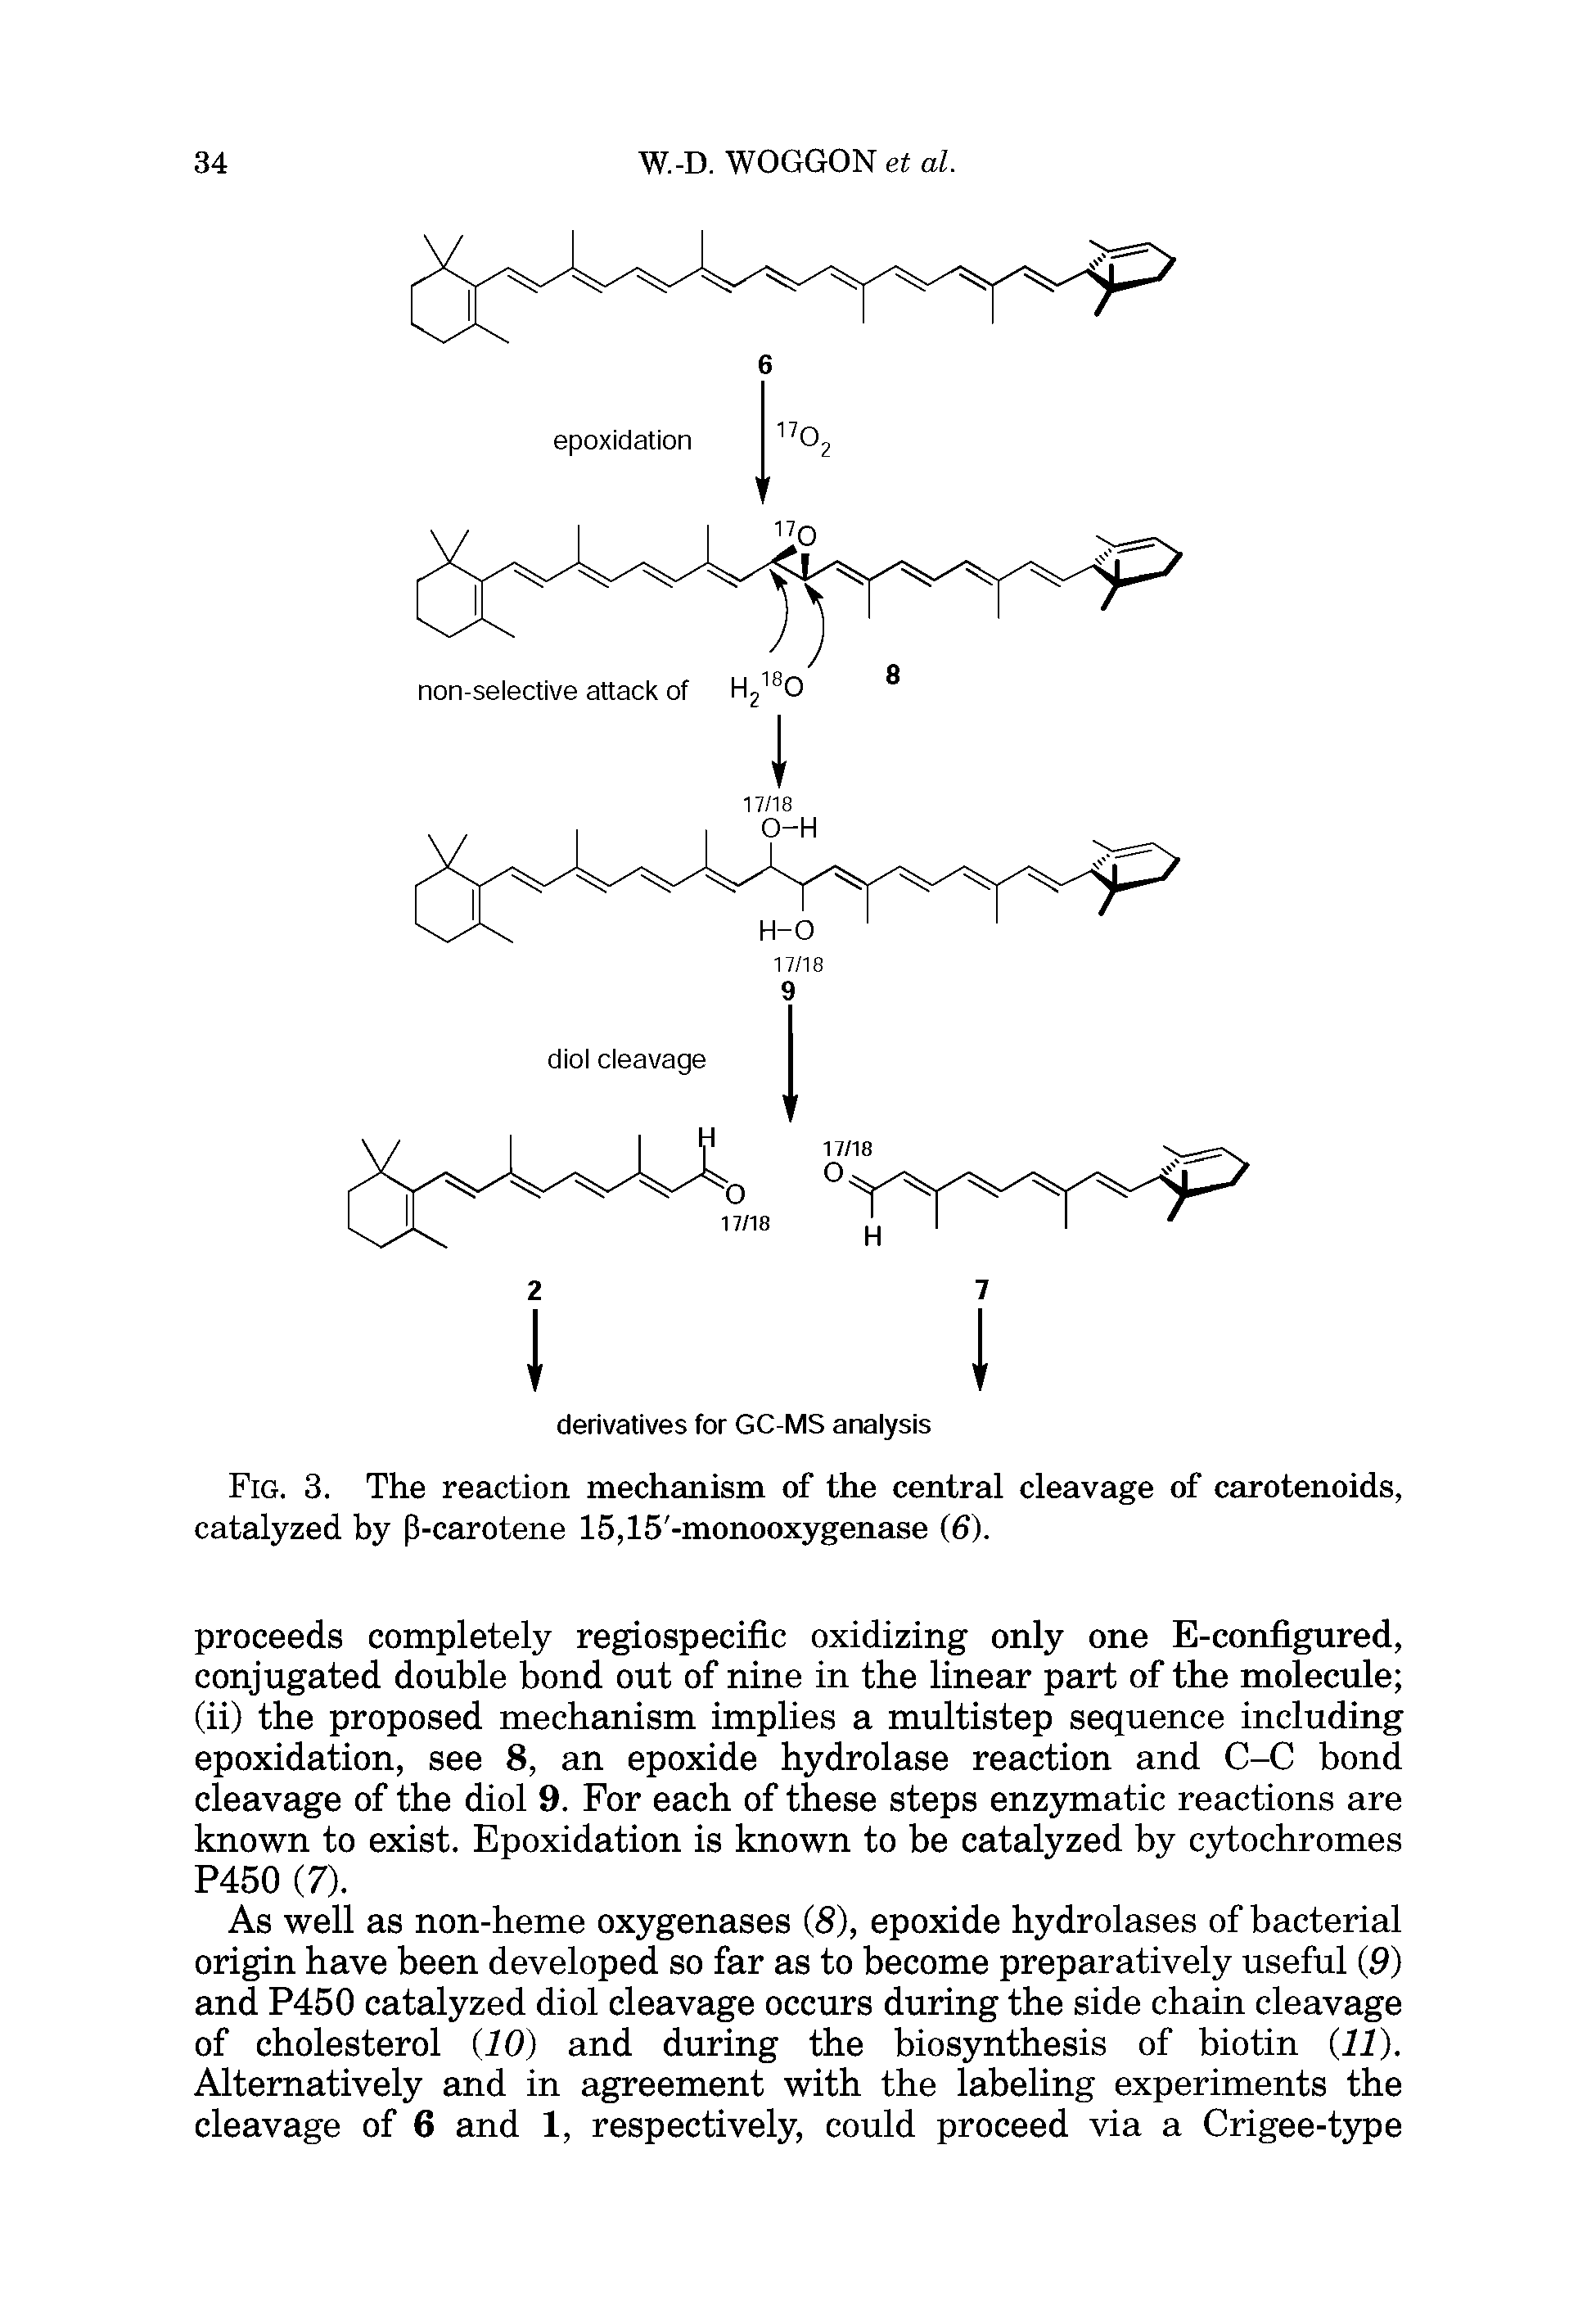 Fig. 3. The reaction mechanism of the central cleavage of carotenoids, catalyzed by p-carotene 15,15 -monooxygenase (6).